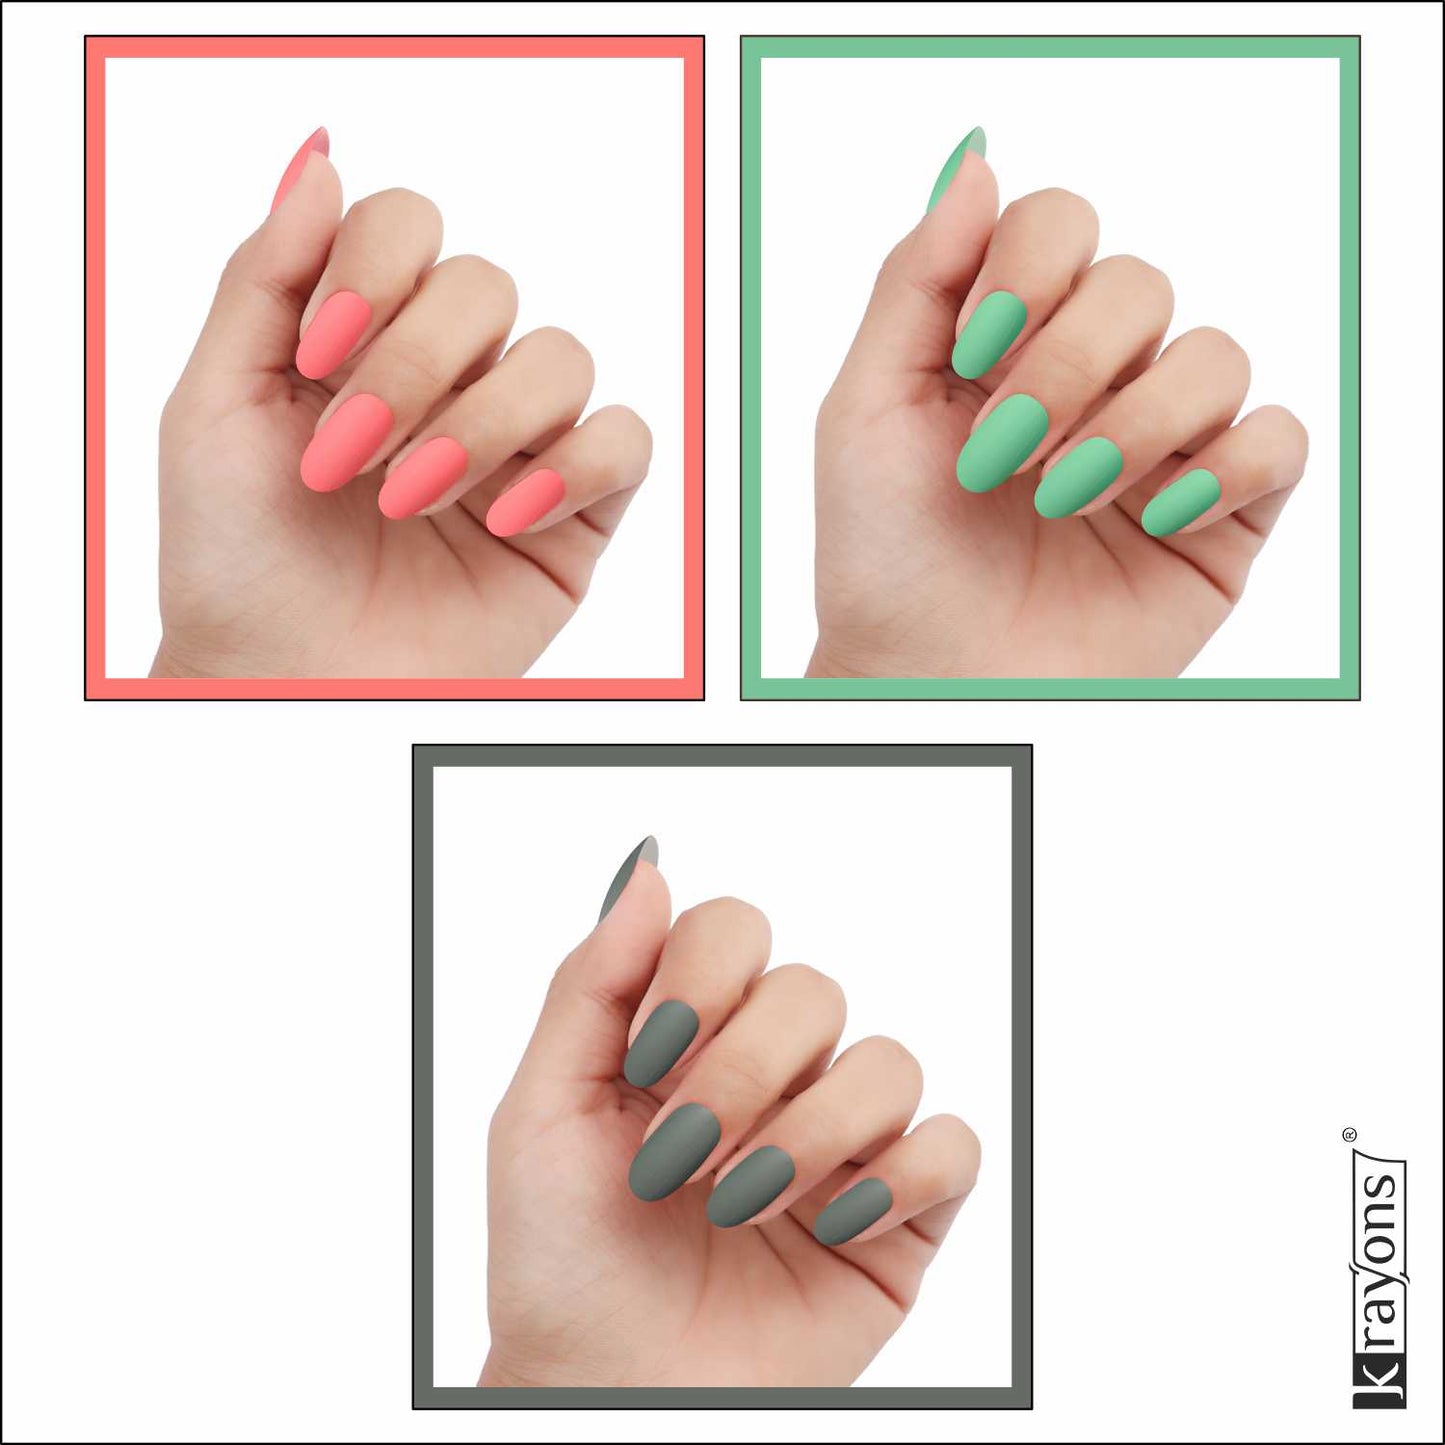 Krayons Cute Super Matte Finish Nail Enamel, Quick Dry, LongLasting, Blossom Peach, Mint Green, Charcoal Grey, 6ml Each (Pack of 3)